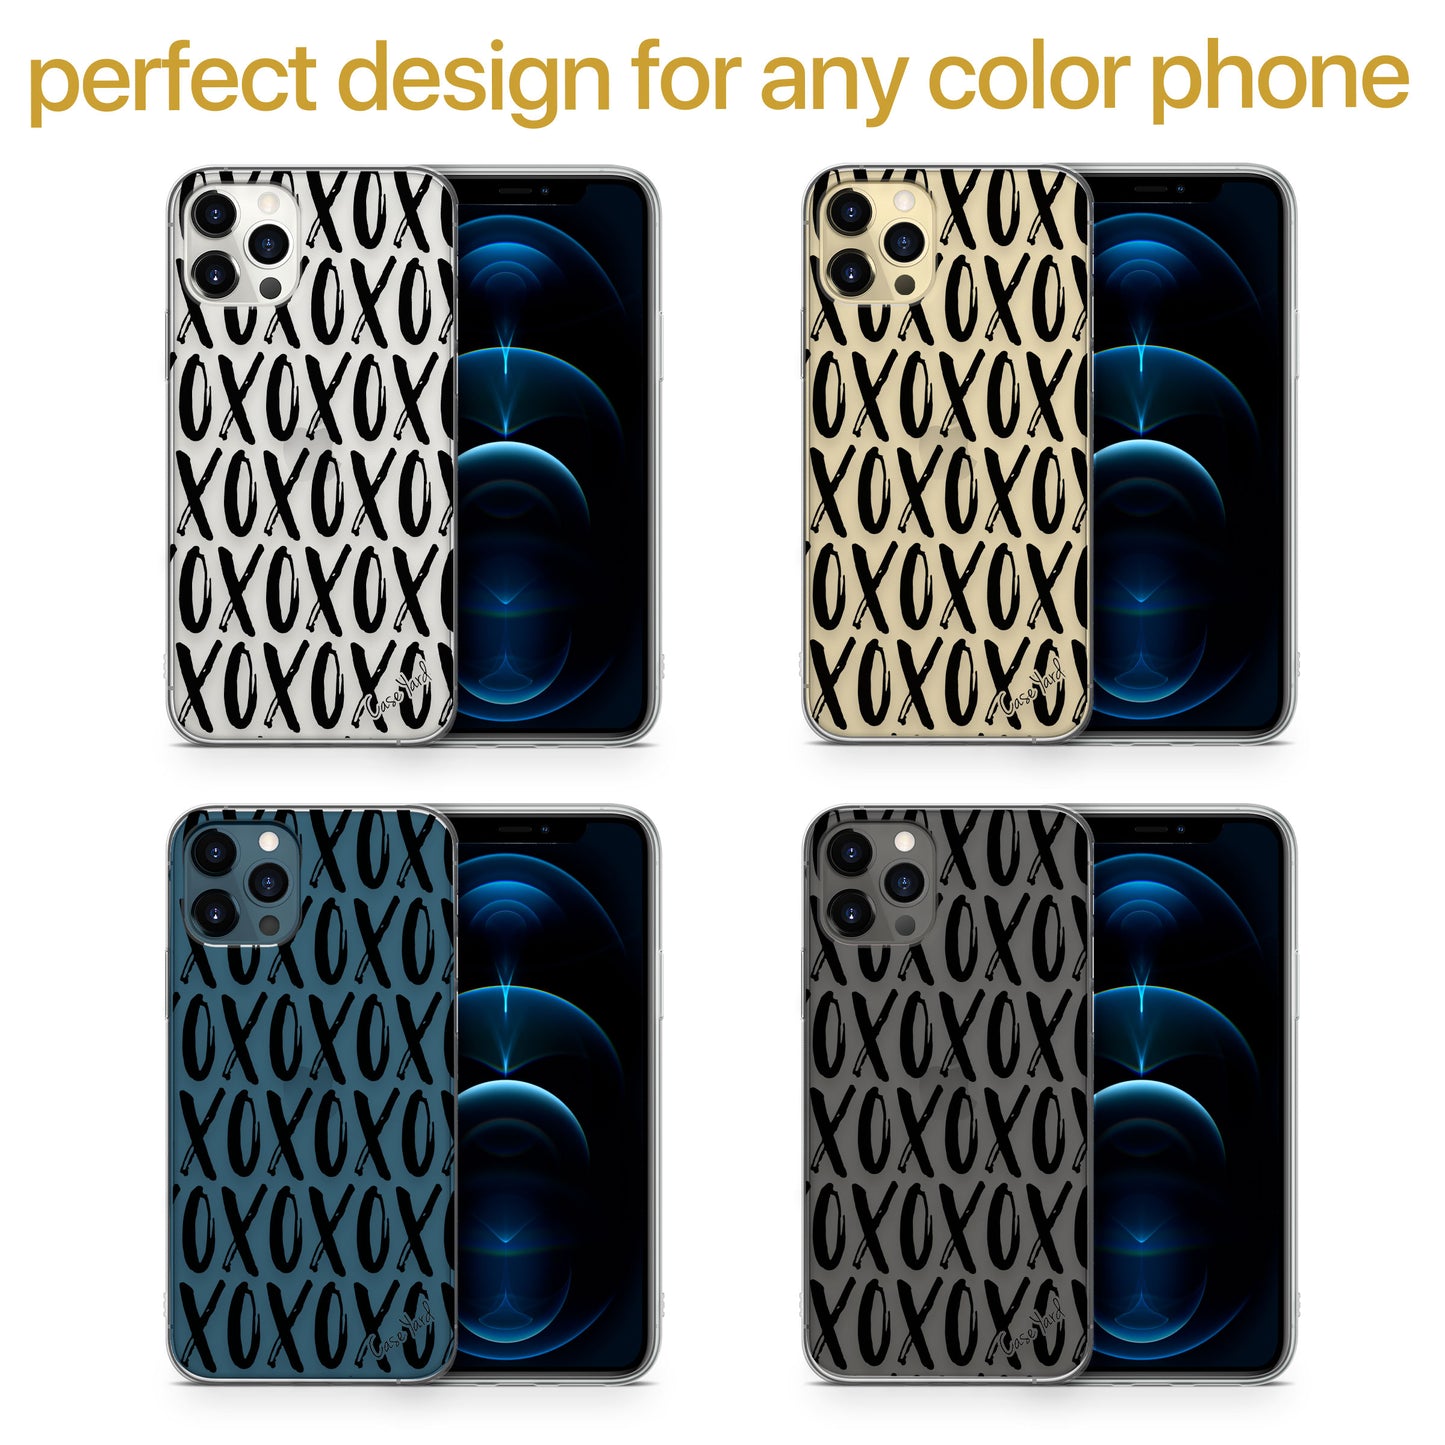 TPU Clear case with (XOXO) Design for iPhone & Samsung Phones